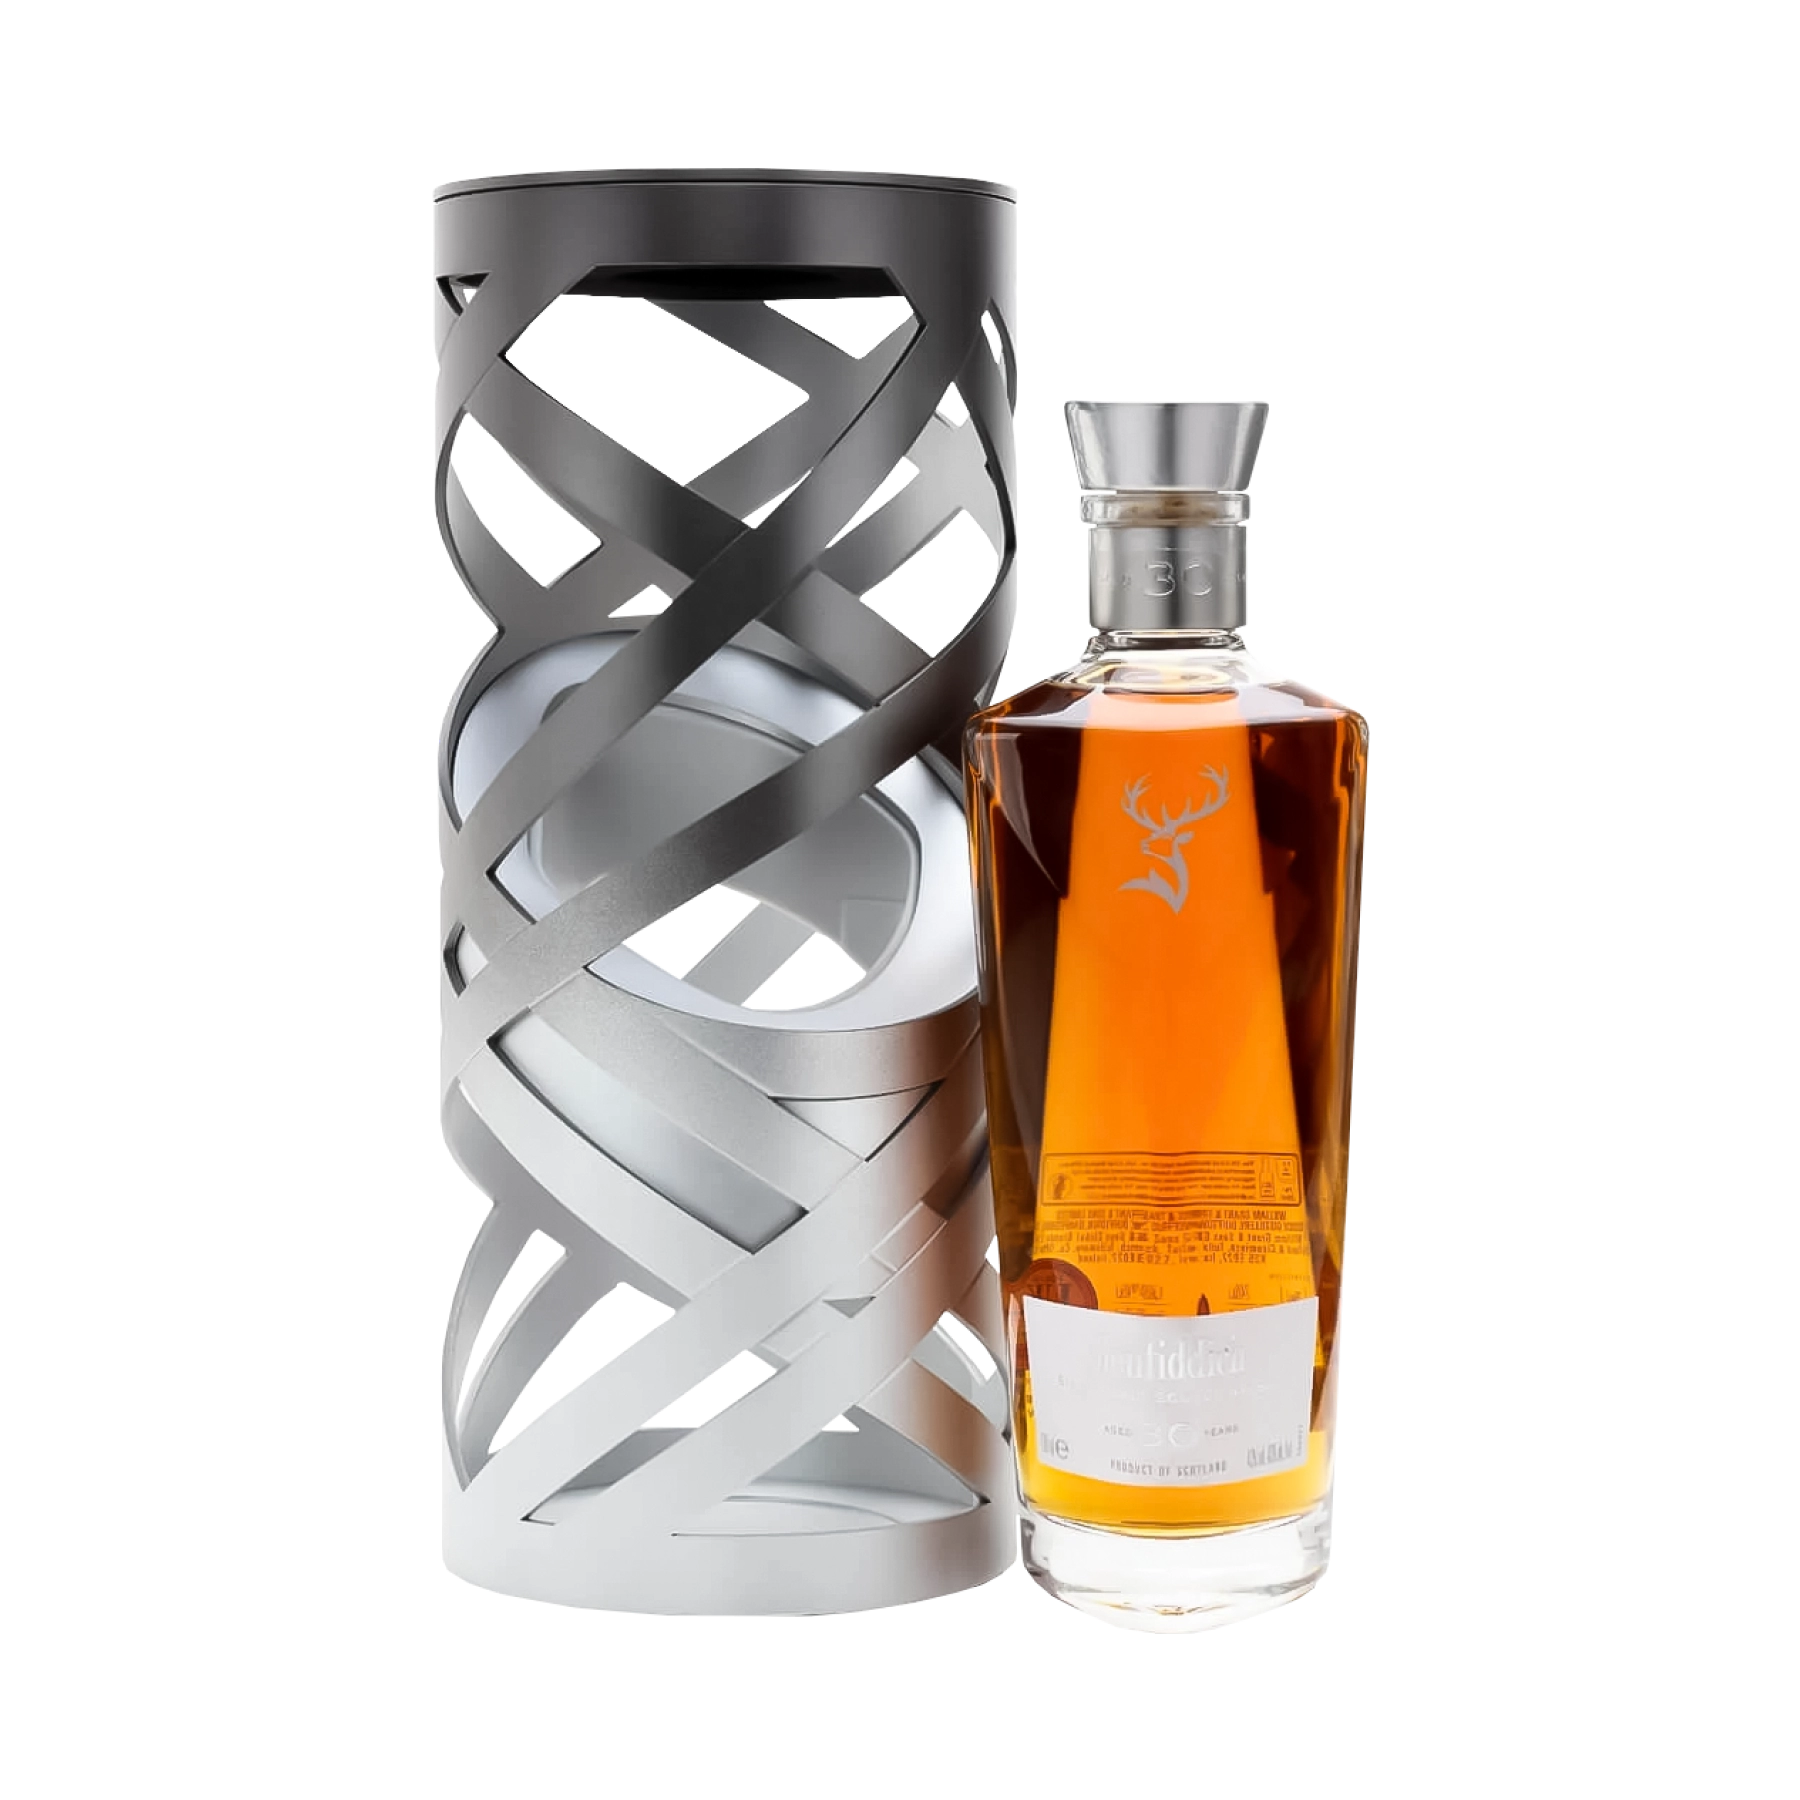 Rượu Whisky Glenfiddich 30 Year Old Suspended Time Re-imagined Time Series